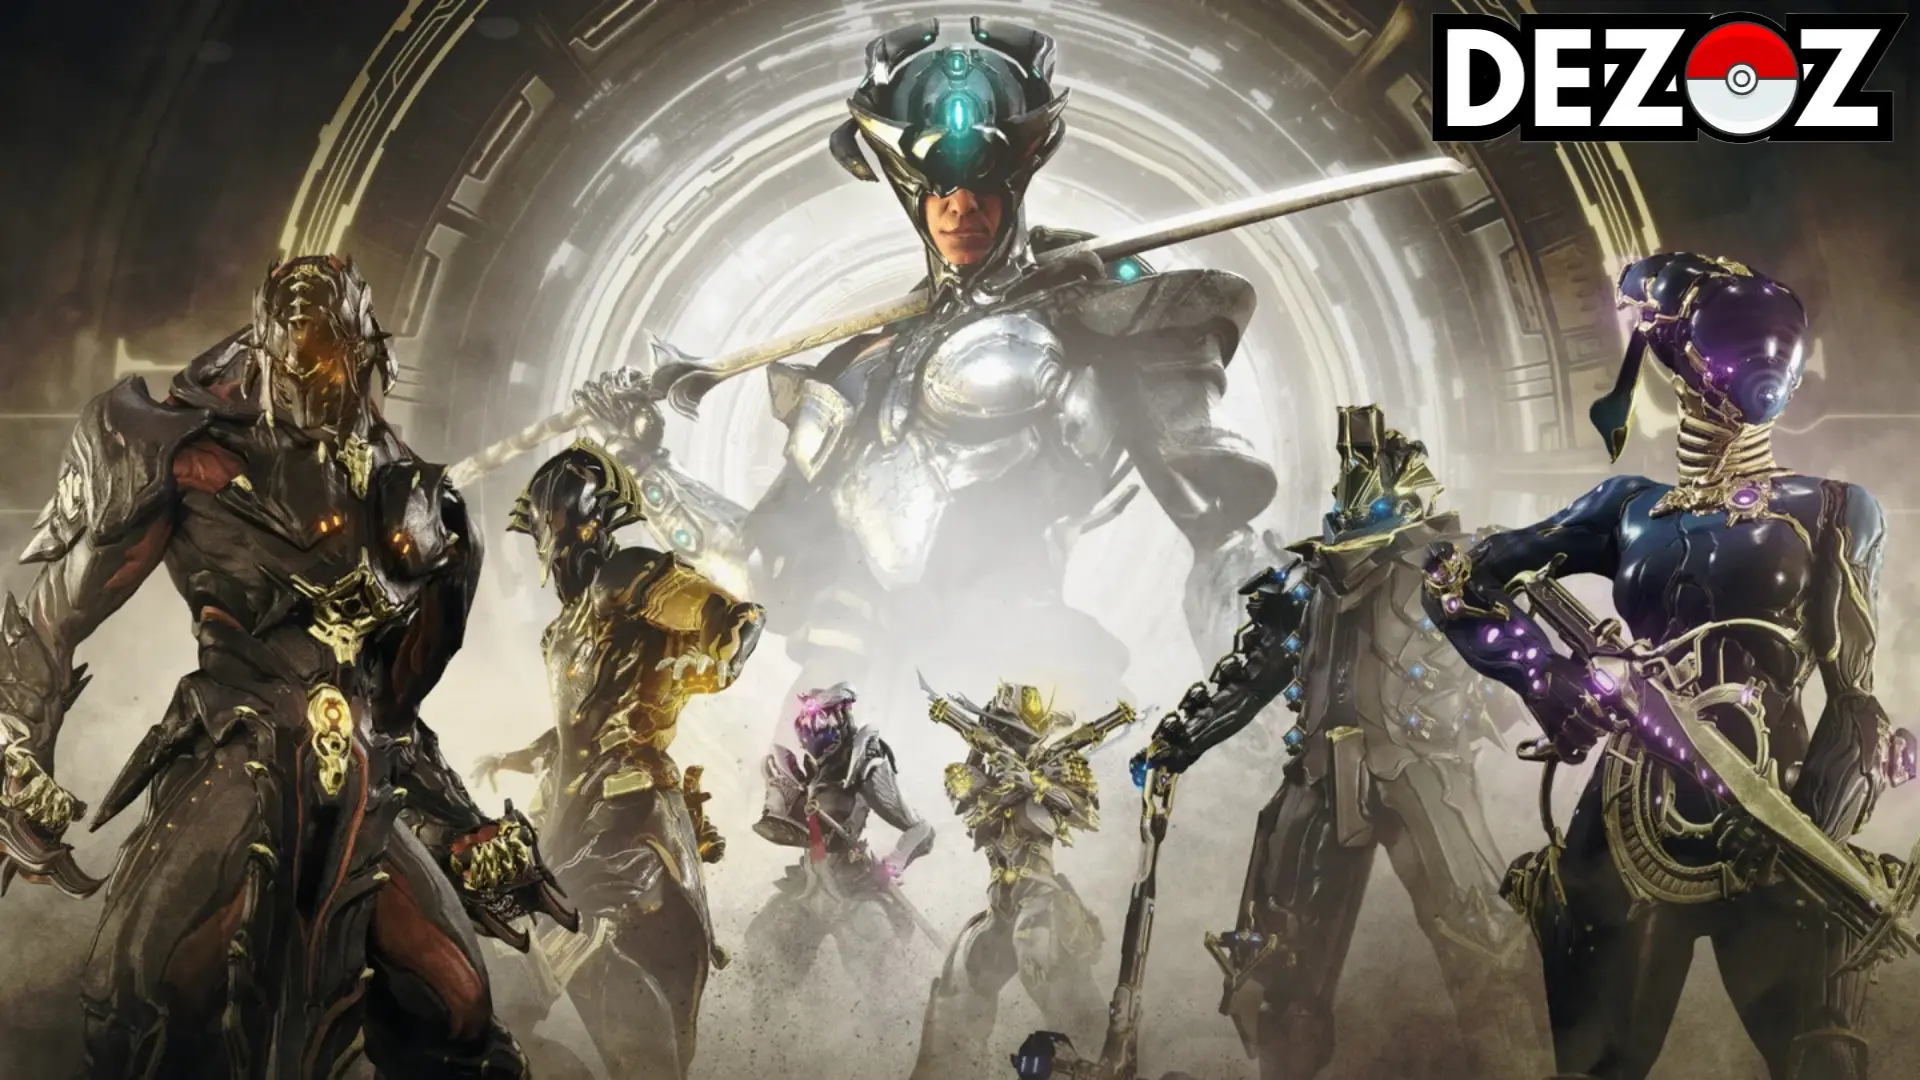 Warframe Promo Codes: Glyph, Weapon, And Booster Codes